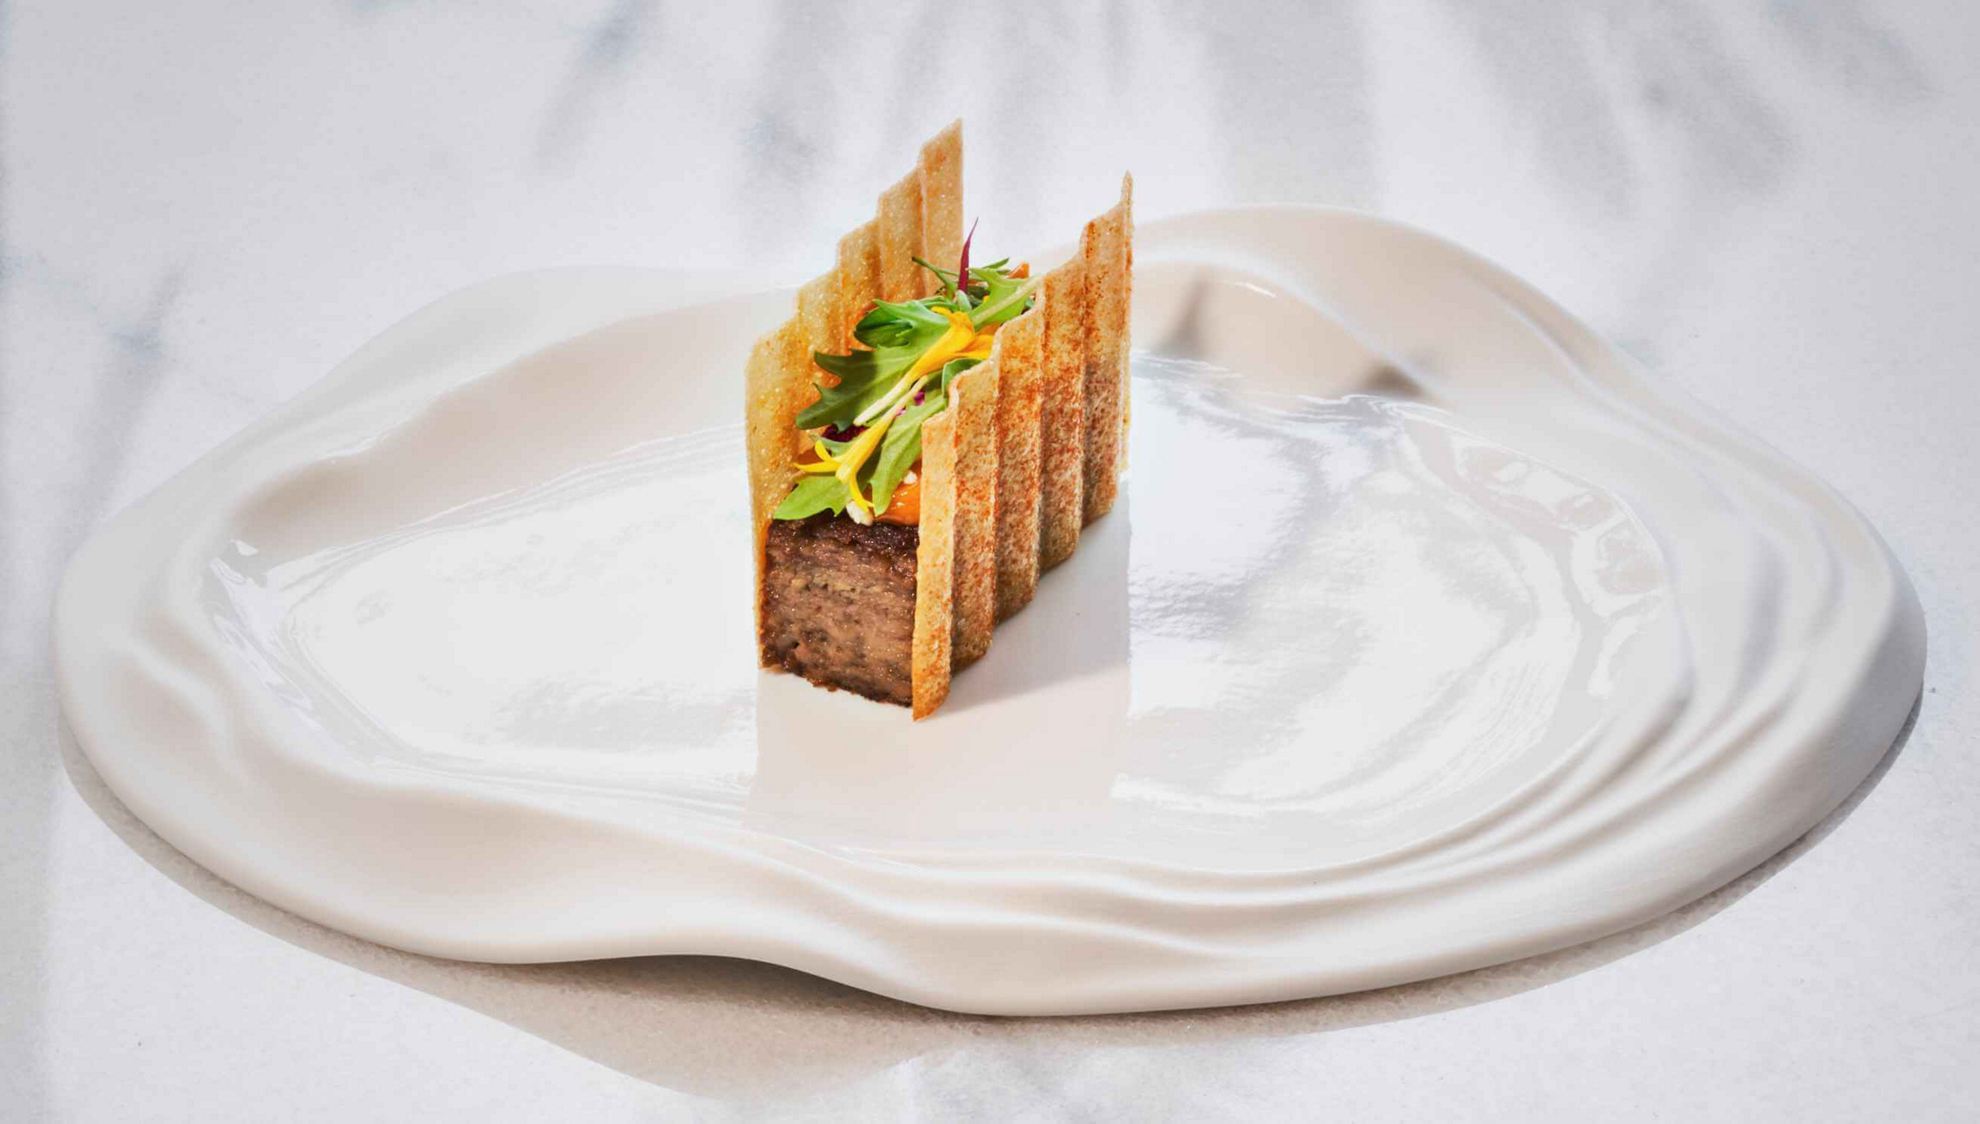 Poemas by Hermanos Padron: a white plate with a small starter